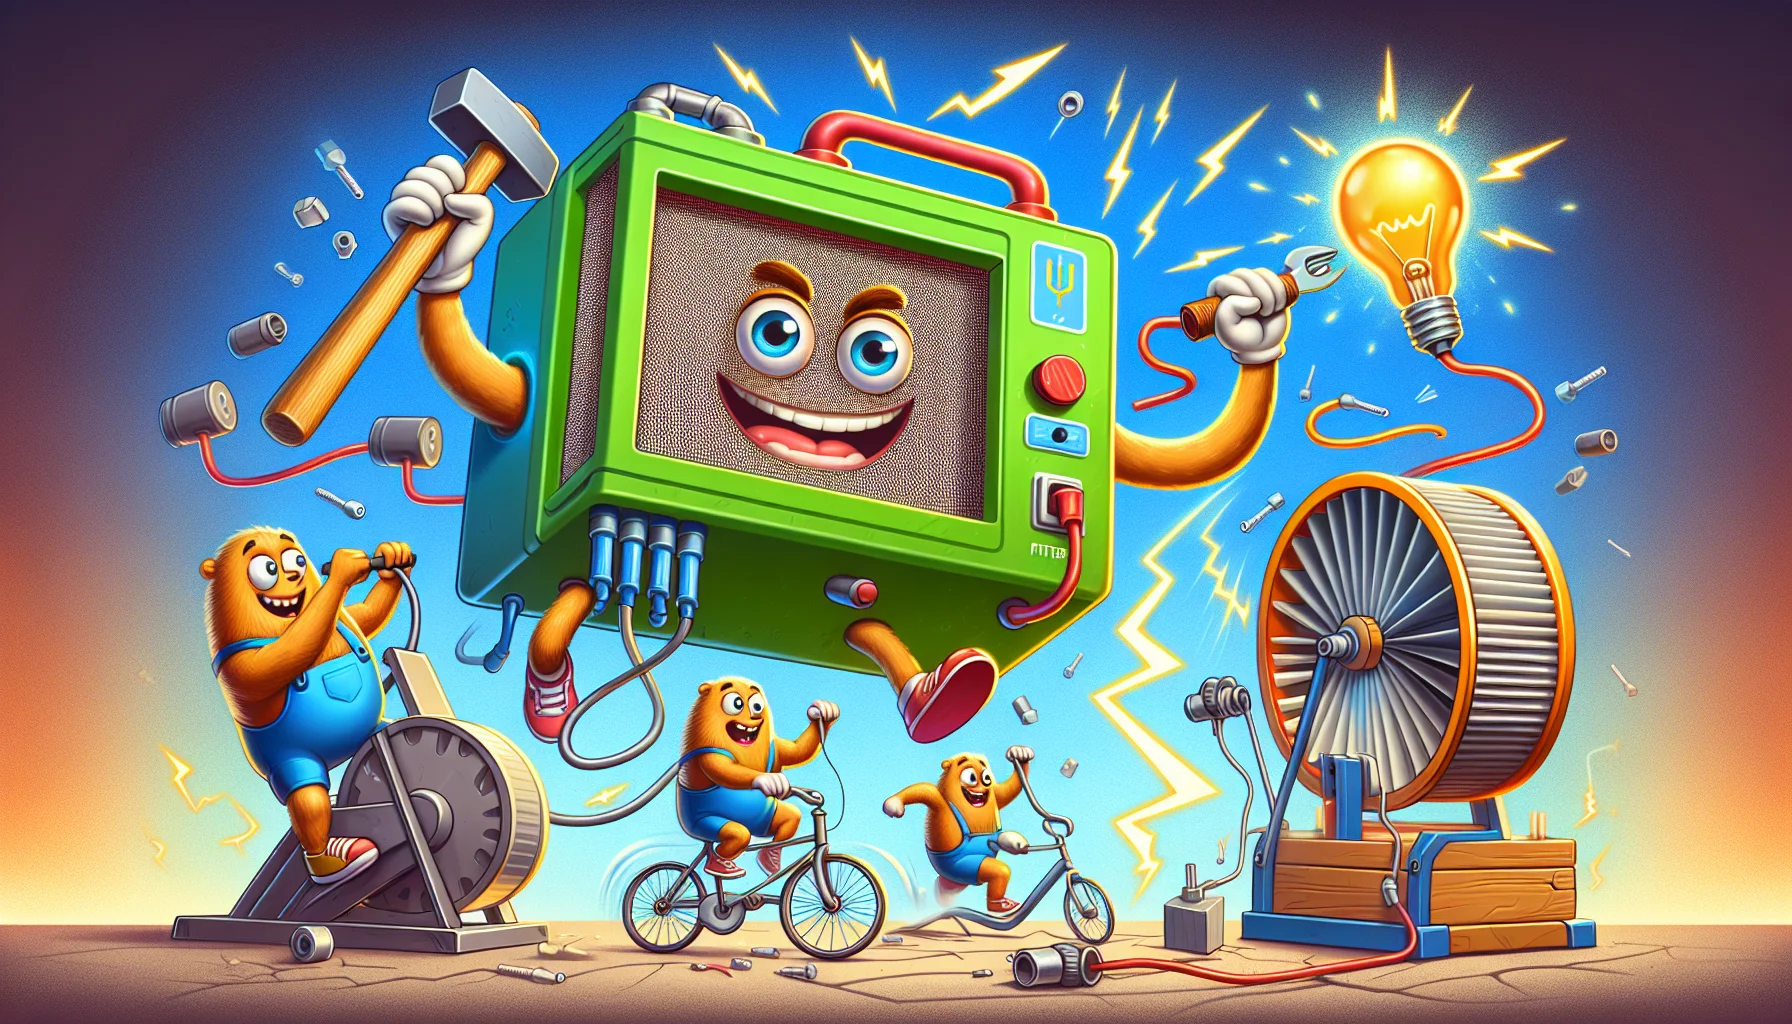 Create an image of a large, vibrantly colored, 7,000 Watt Filter in an entertaining scenario. This filter is anthropomorphized, with cartoon eyes and a wide grin. It engages in various fun activities such as swinging a hammer at a dynamo to generate electricity, riding a stationary bike with wires leading to a bulb, and running on a human-sized hamster wheel connected to a power generator. The atmosphere should be playful and energetic, with bright, exaggerated sparks of electricity and fun visual effects indicating the generation of power.